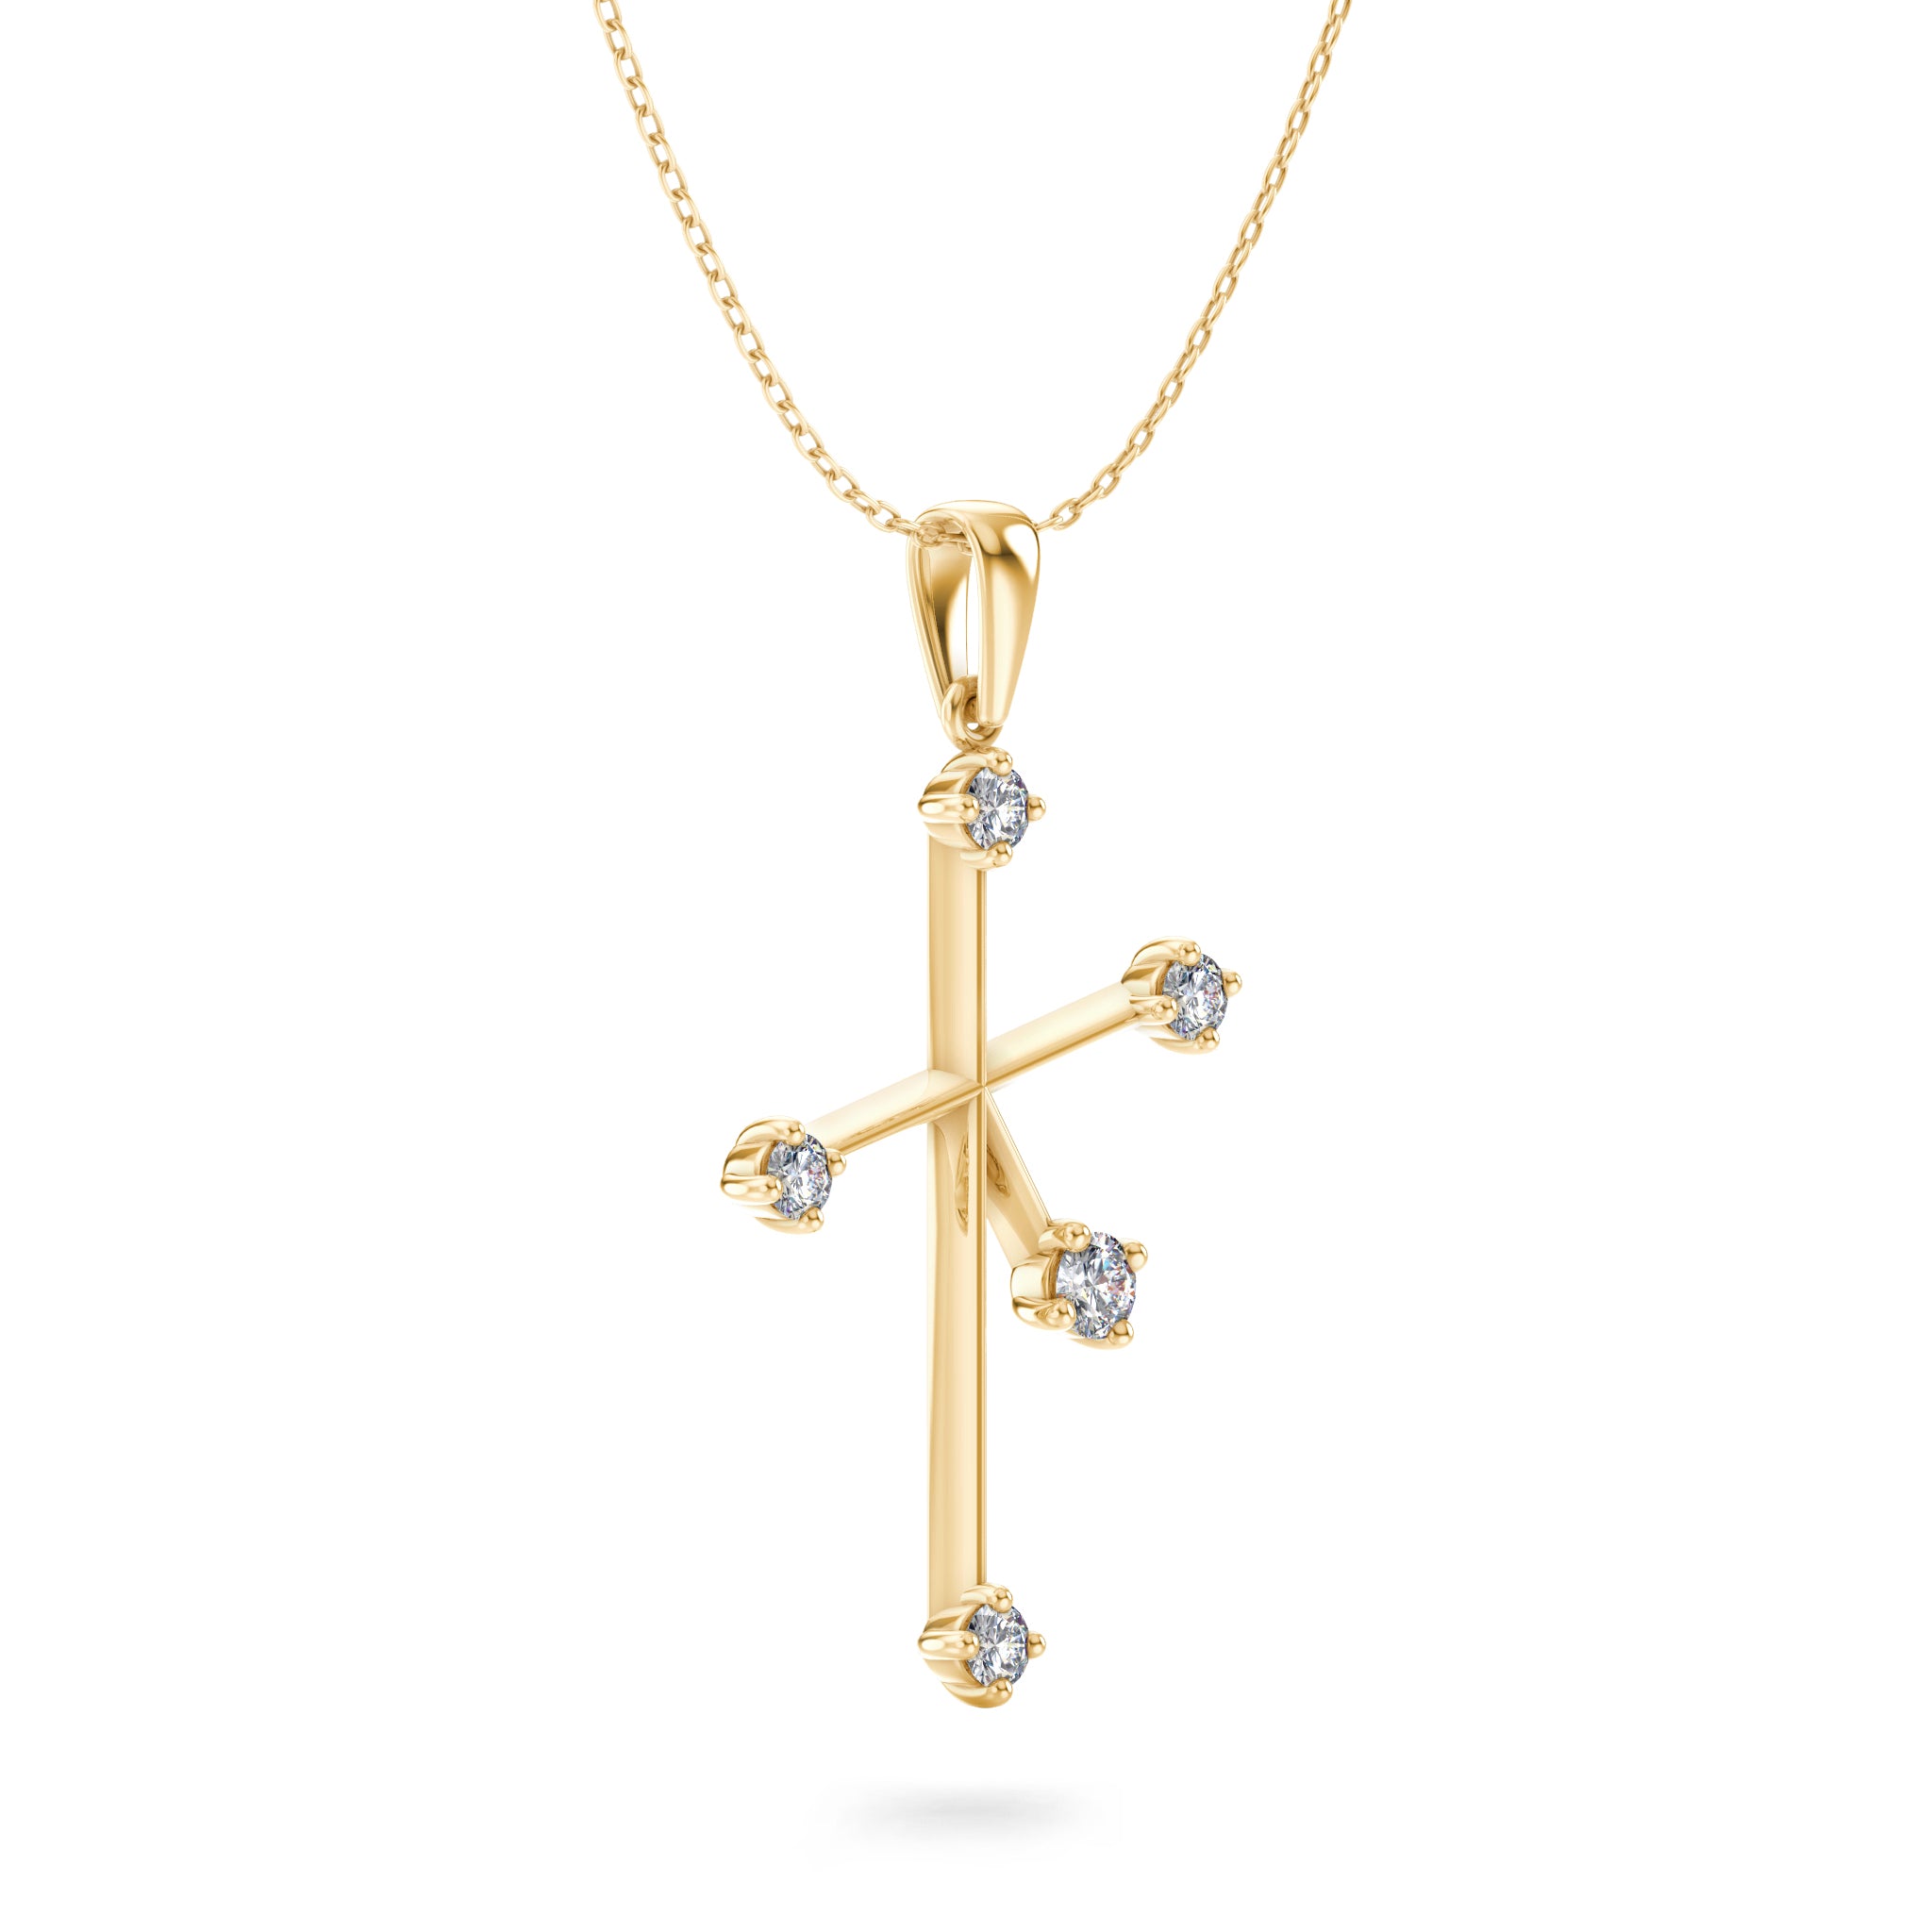 Shimansky - Southern Cross Large Diamond Pendant Crafted in 14K Yellow Gold